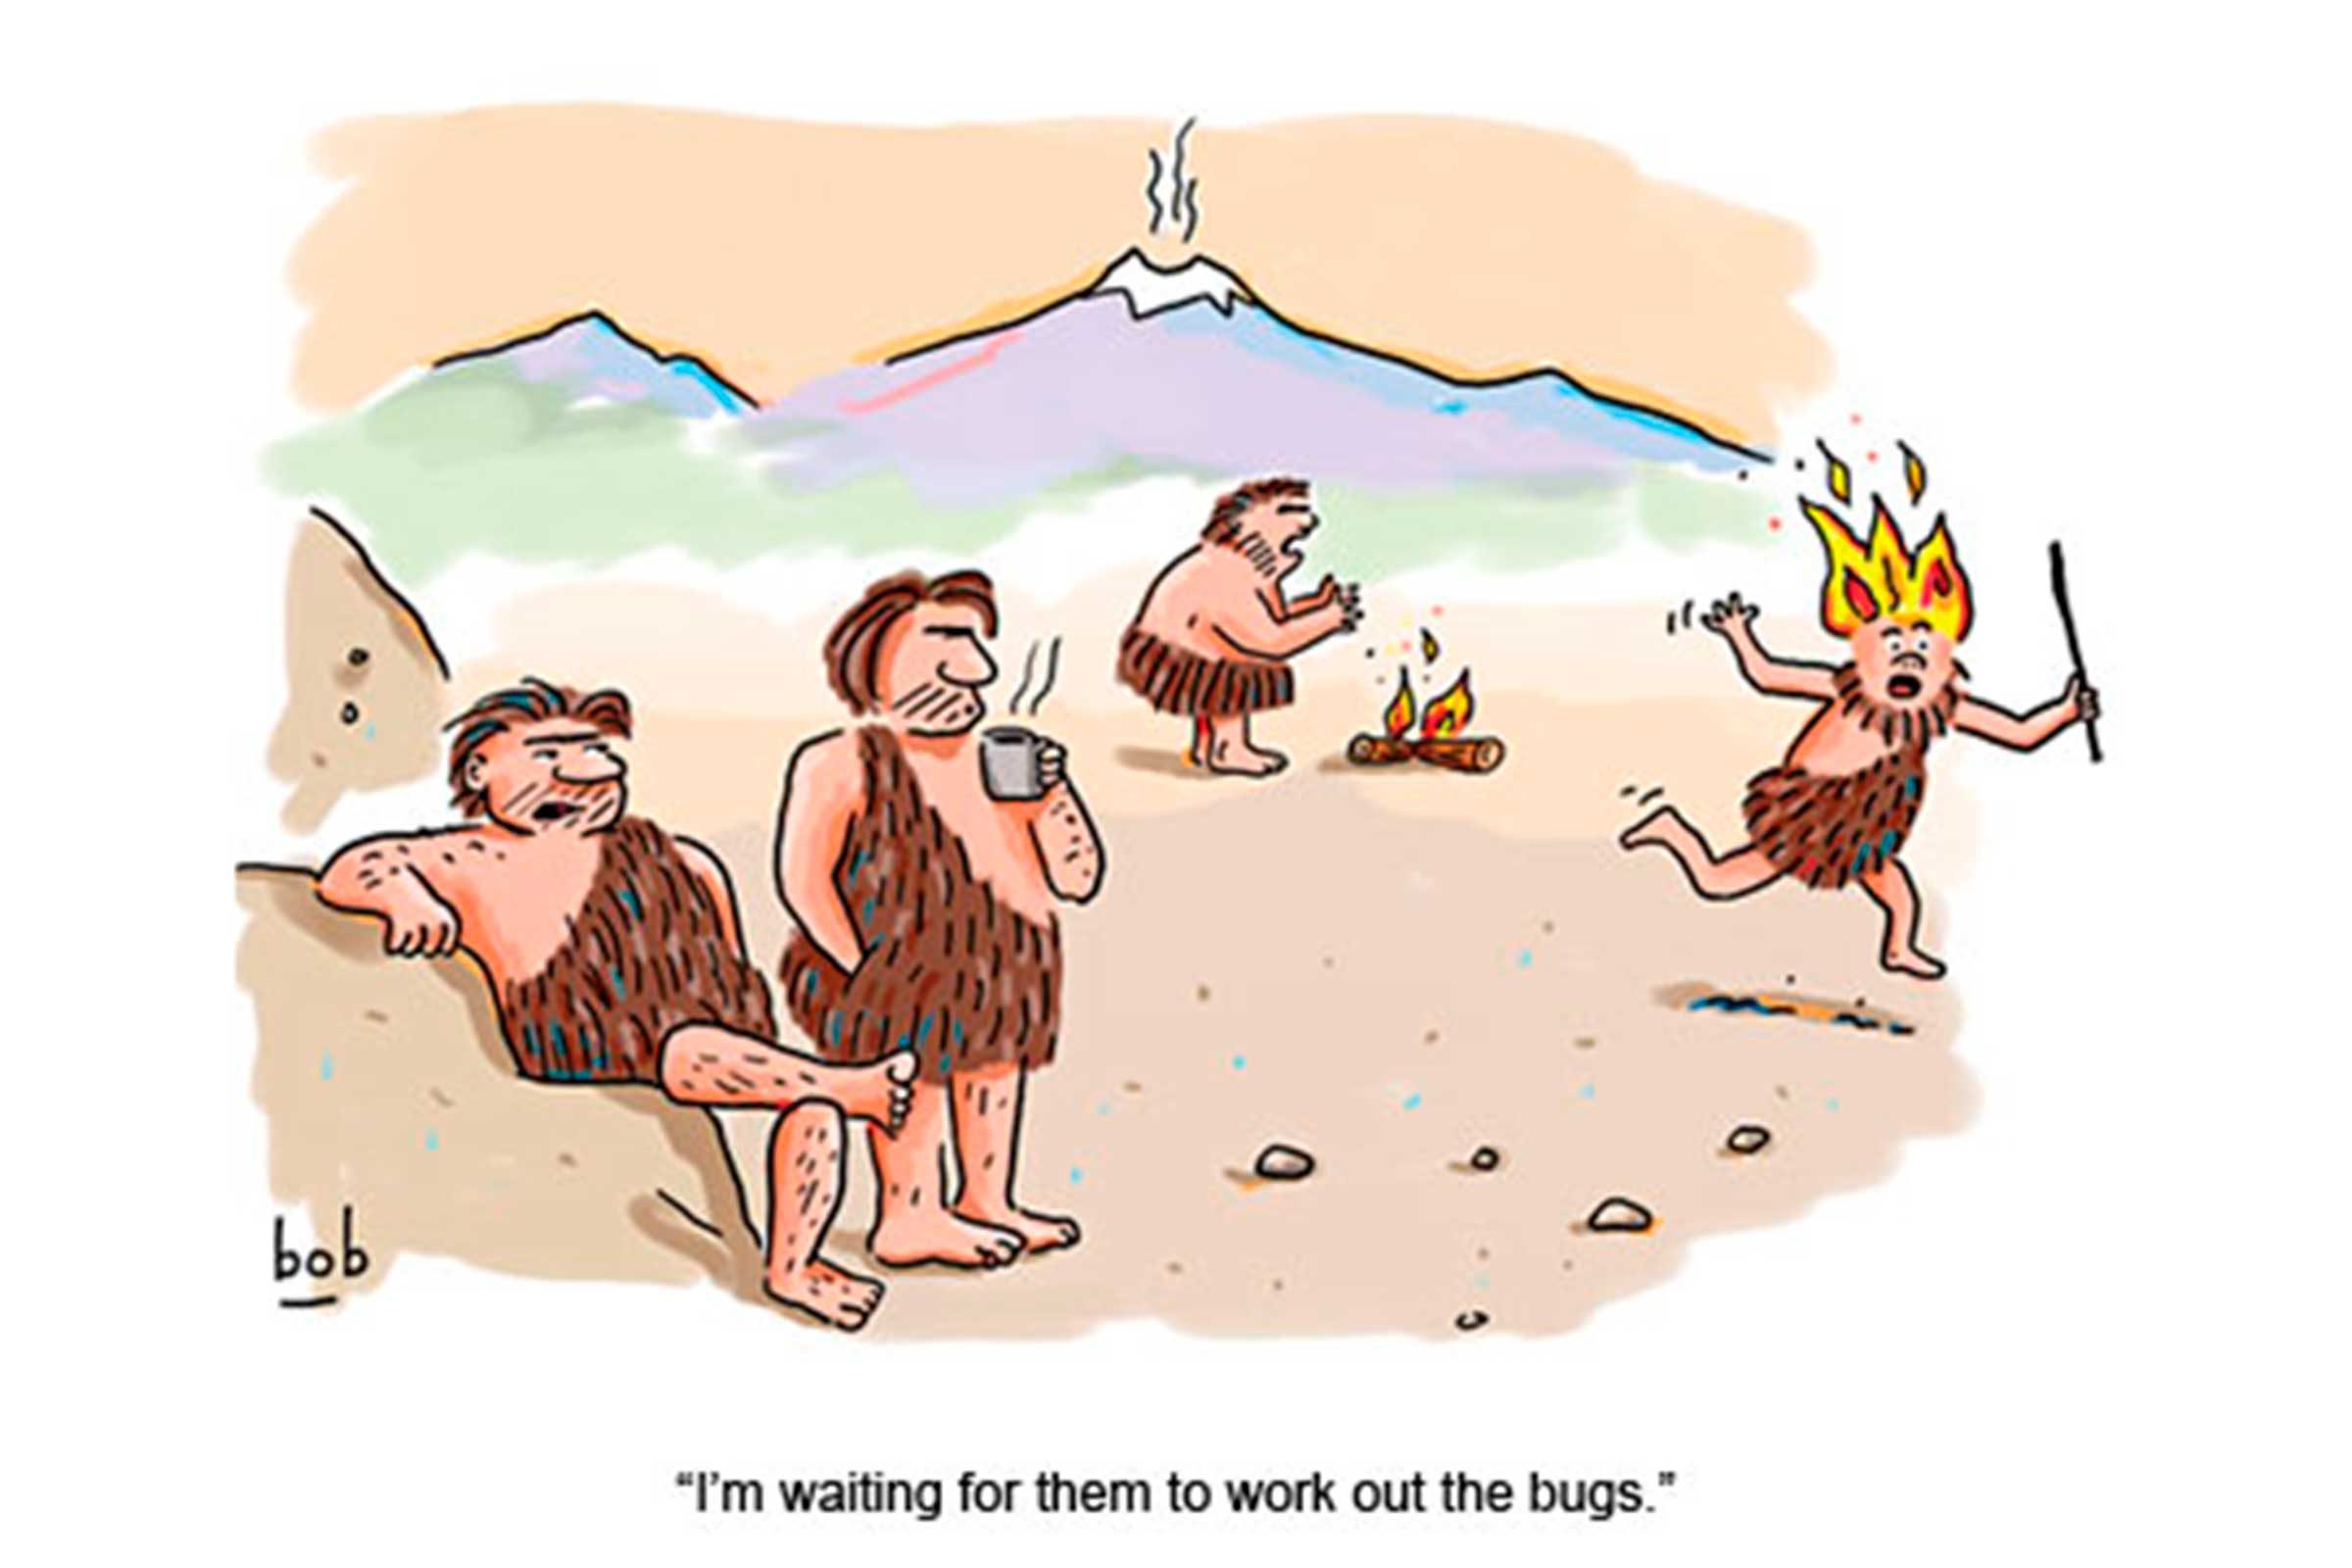 23 Funny Cartoons Technology Phobes Can Appreciate Readers Digest